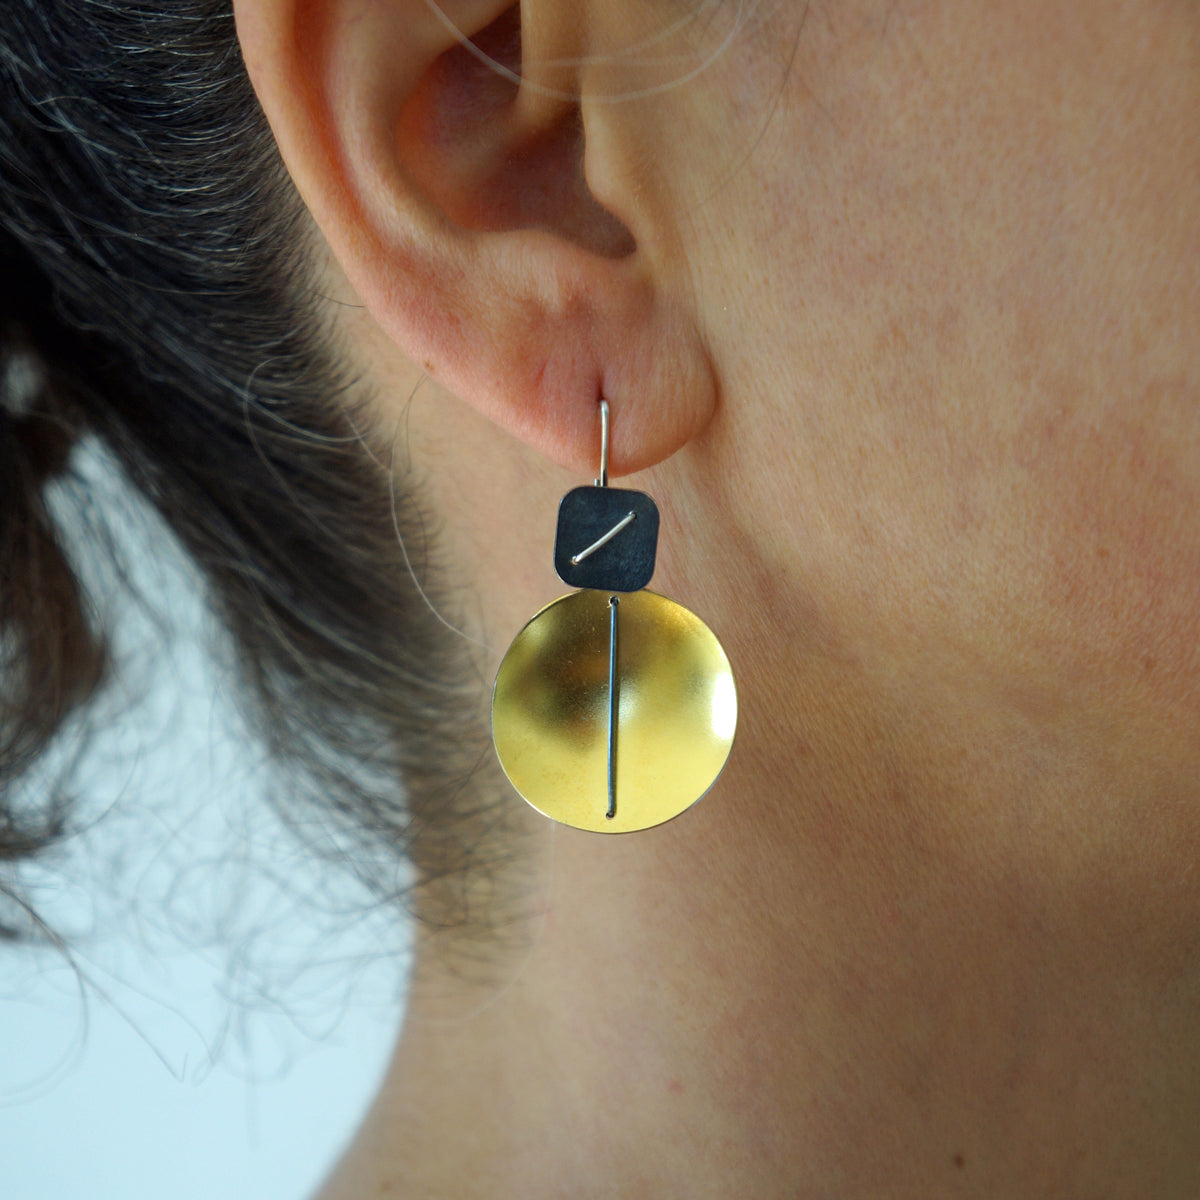 Suzanne Schwartz wearing Circle and Square Hanging Earring